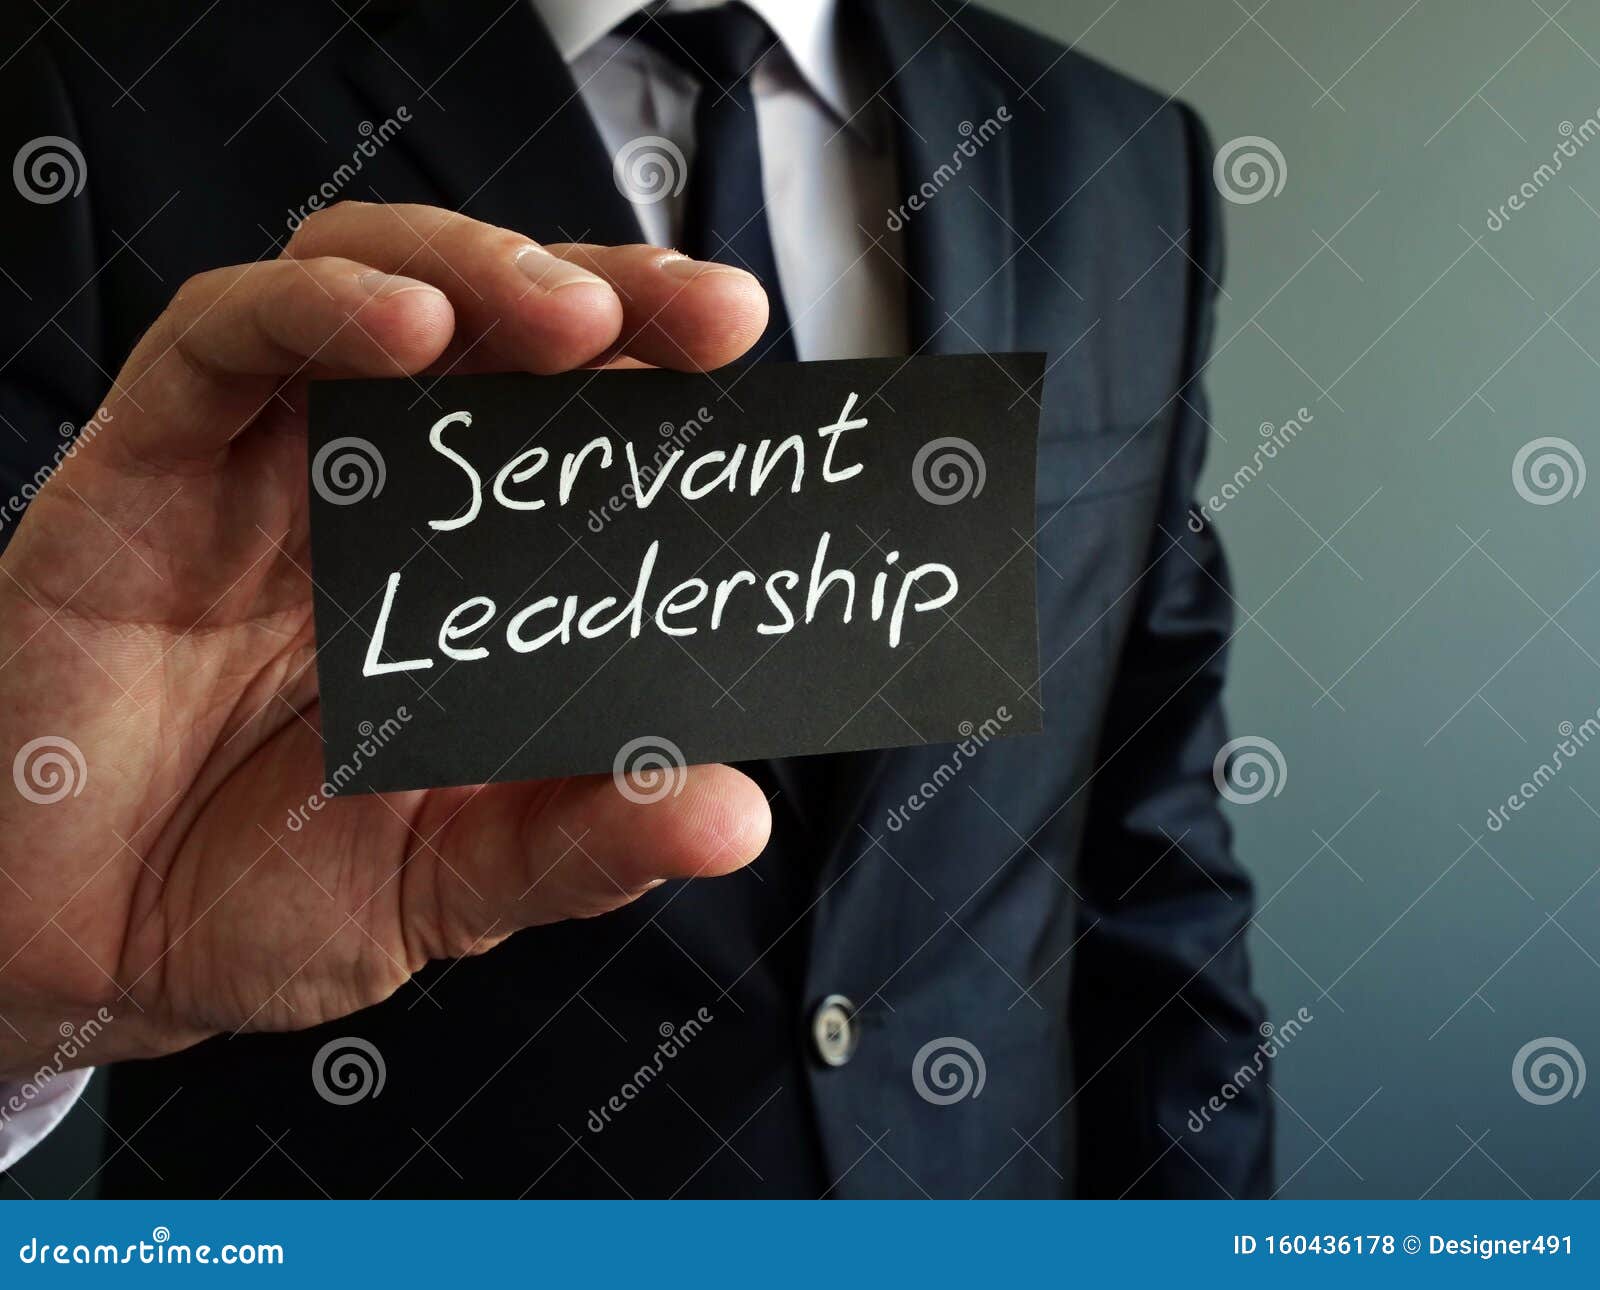 servant leadership concept. black piece of paper in the hand